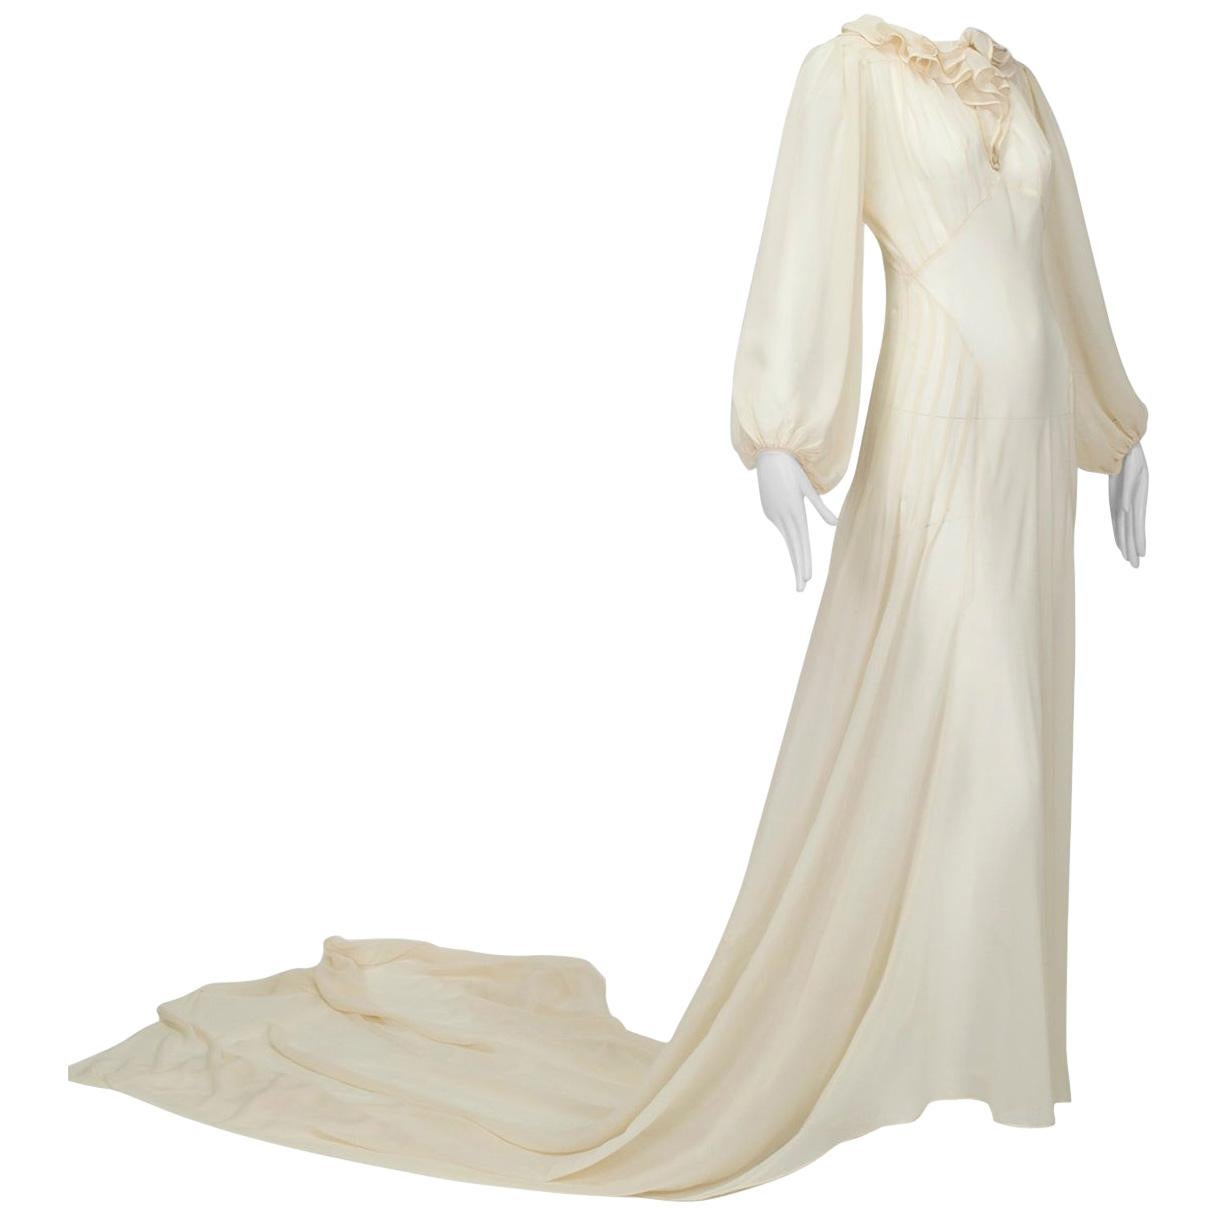 Haute Couture Cream Medieval Cathedral Train Wedding Gown - Small, 1930s